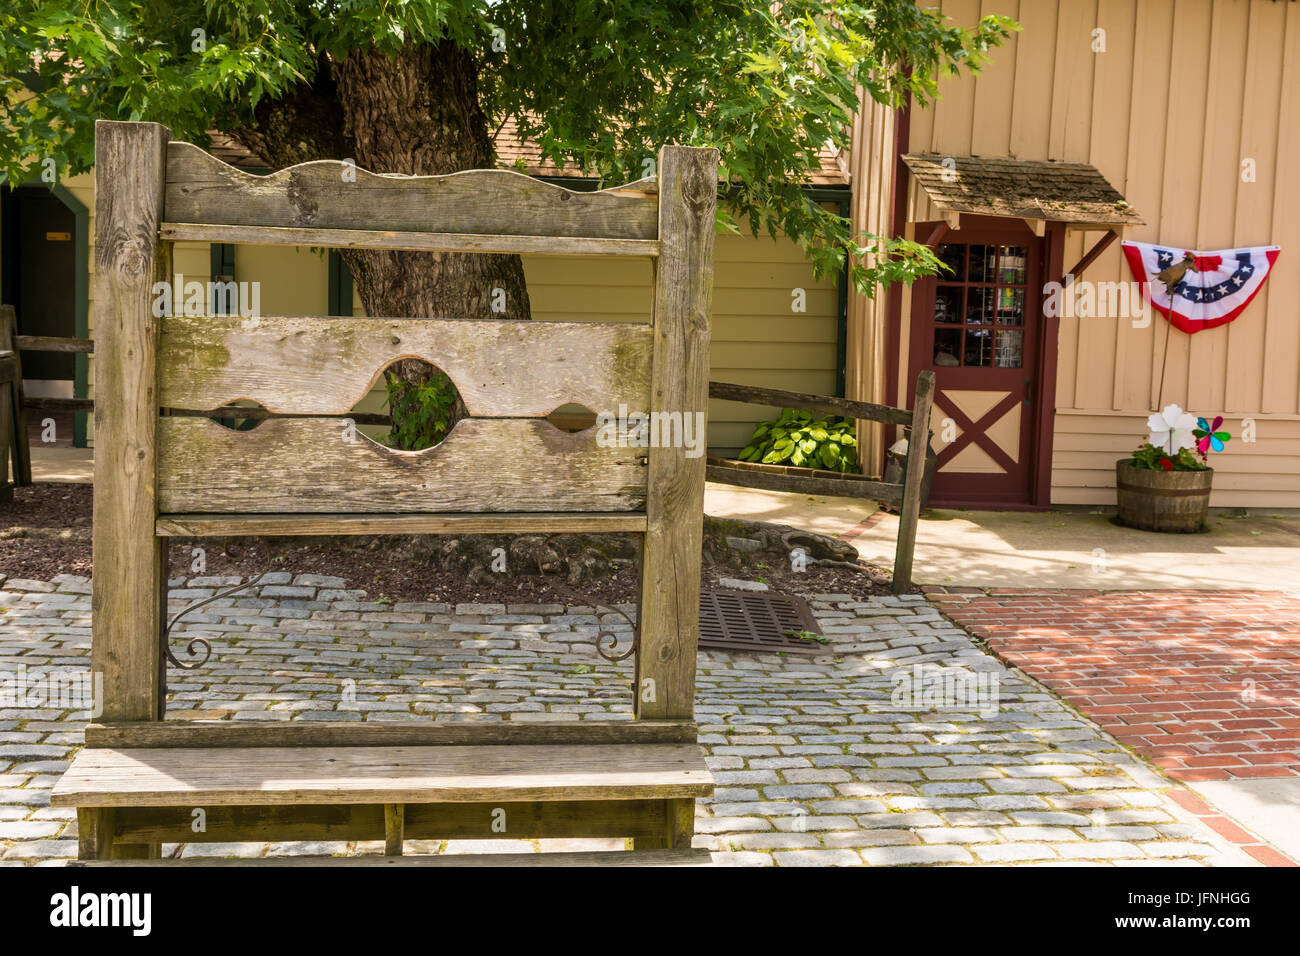 An old Pillory on display at Smithville New Jersey Stock Photo